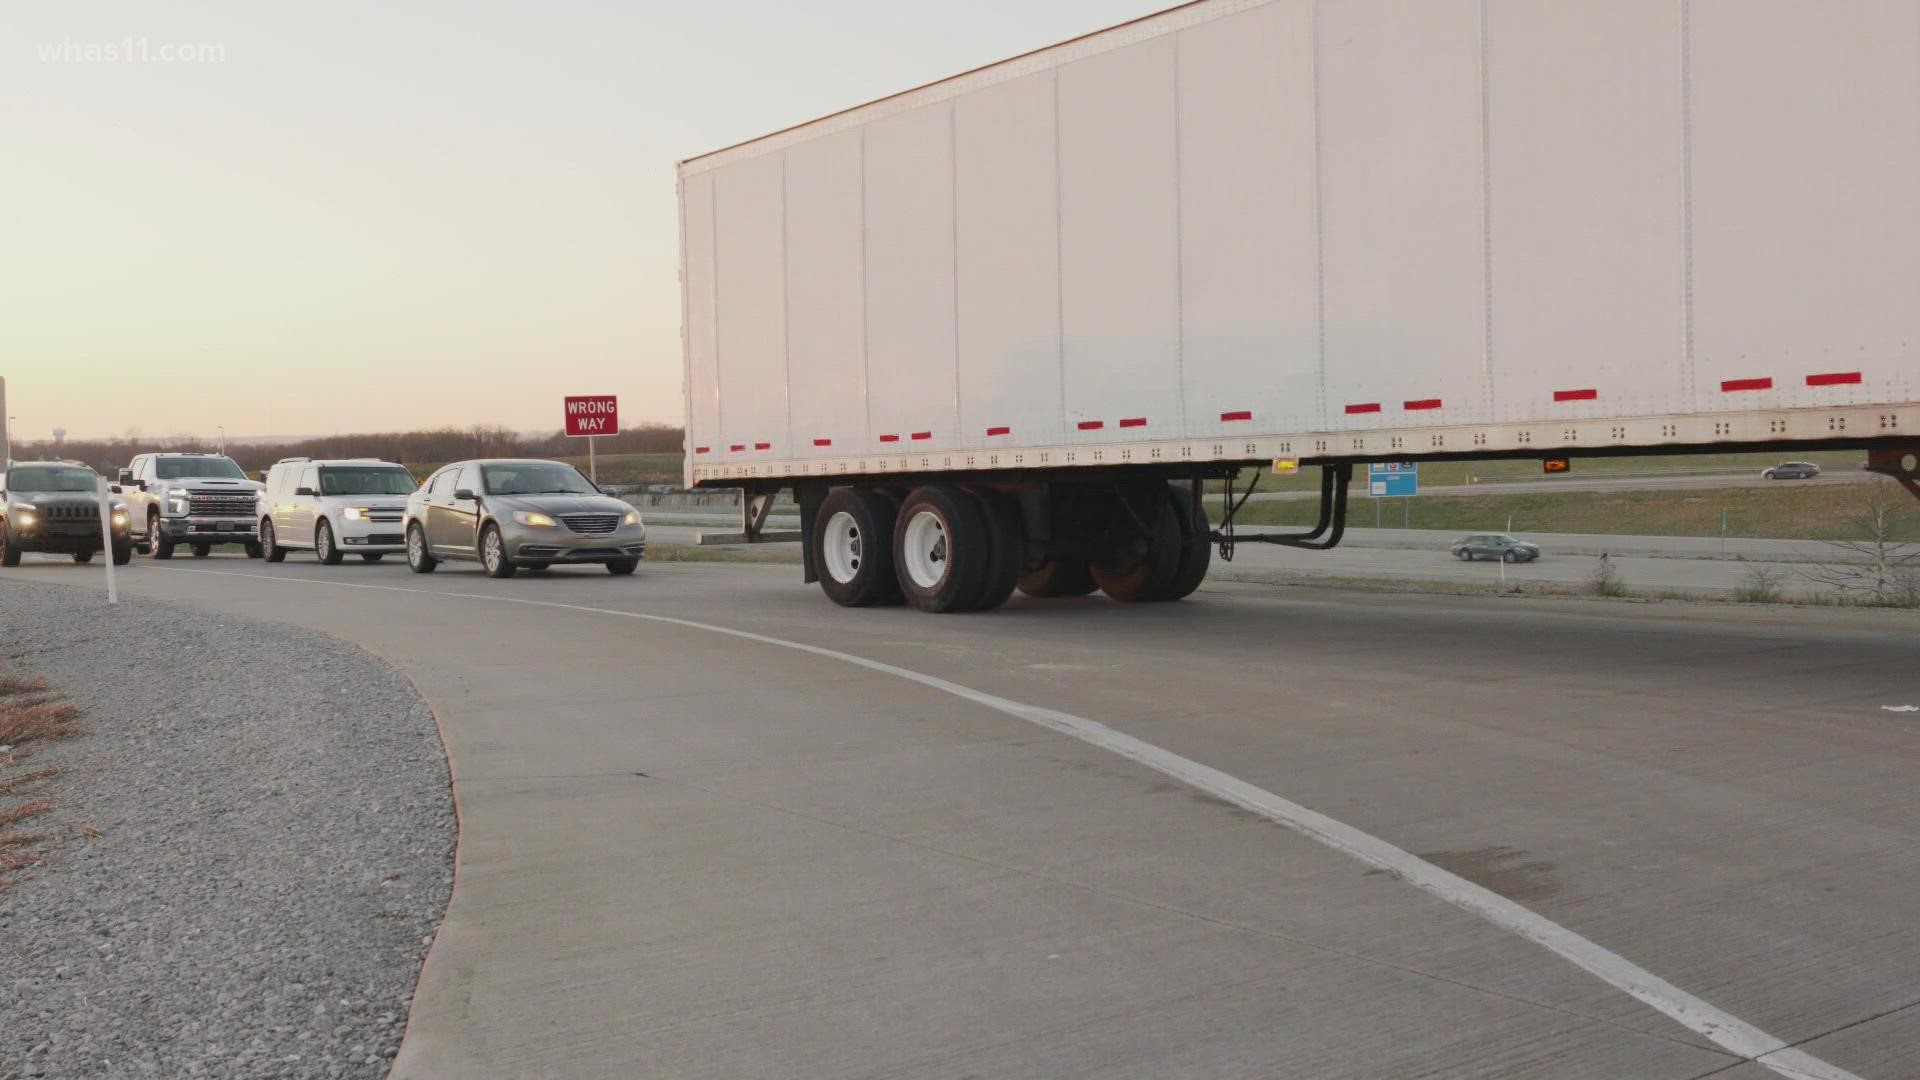 The rear of trucks are already supposed to be protected against crashes, but guarding the sides could soon be down the road as well.